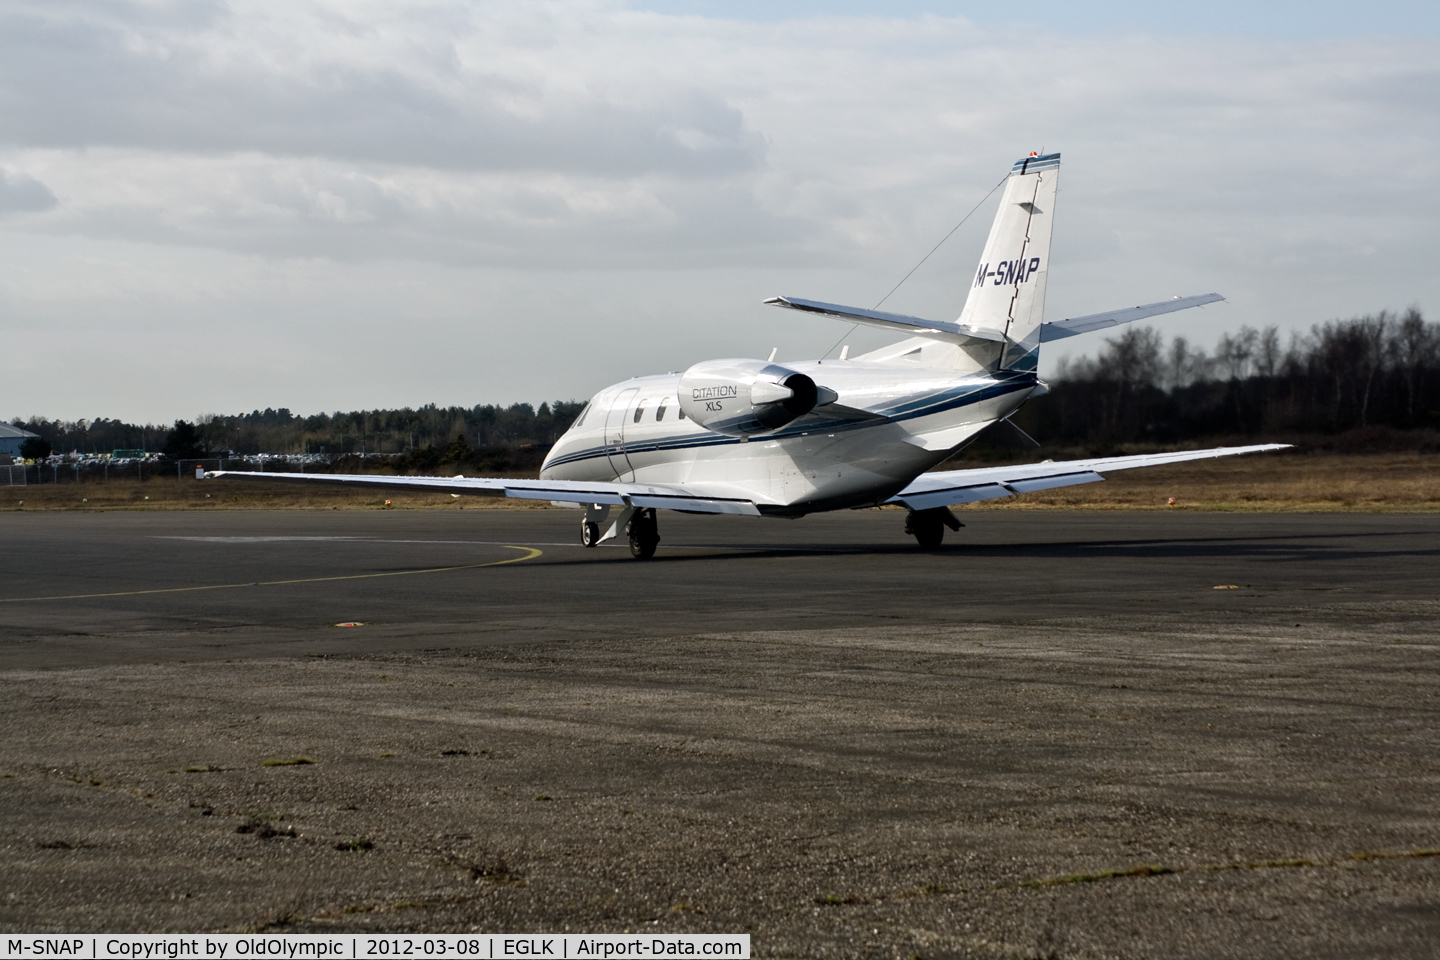 M-SNAP, 2008 Cessna 560XL Citation XLS C/N 560-5770, Departing RW25 after 10 minute turnround